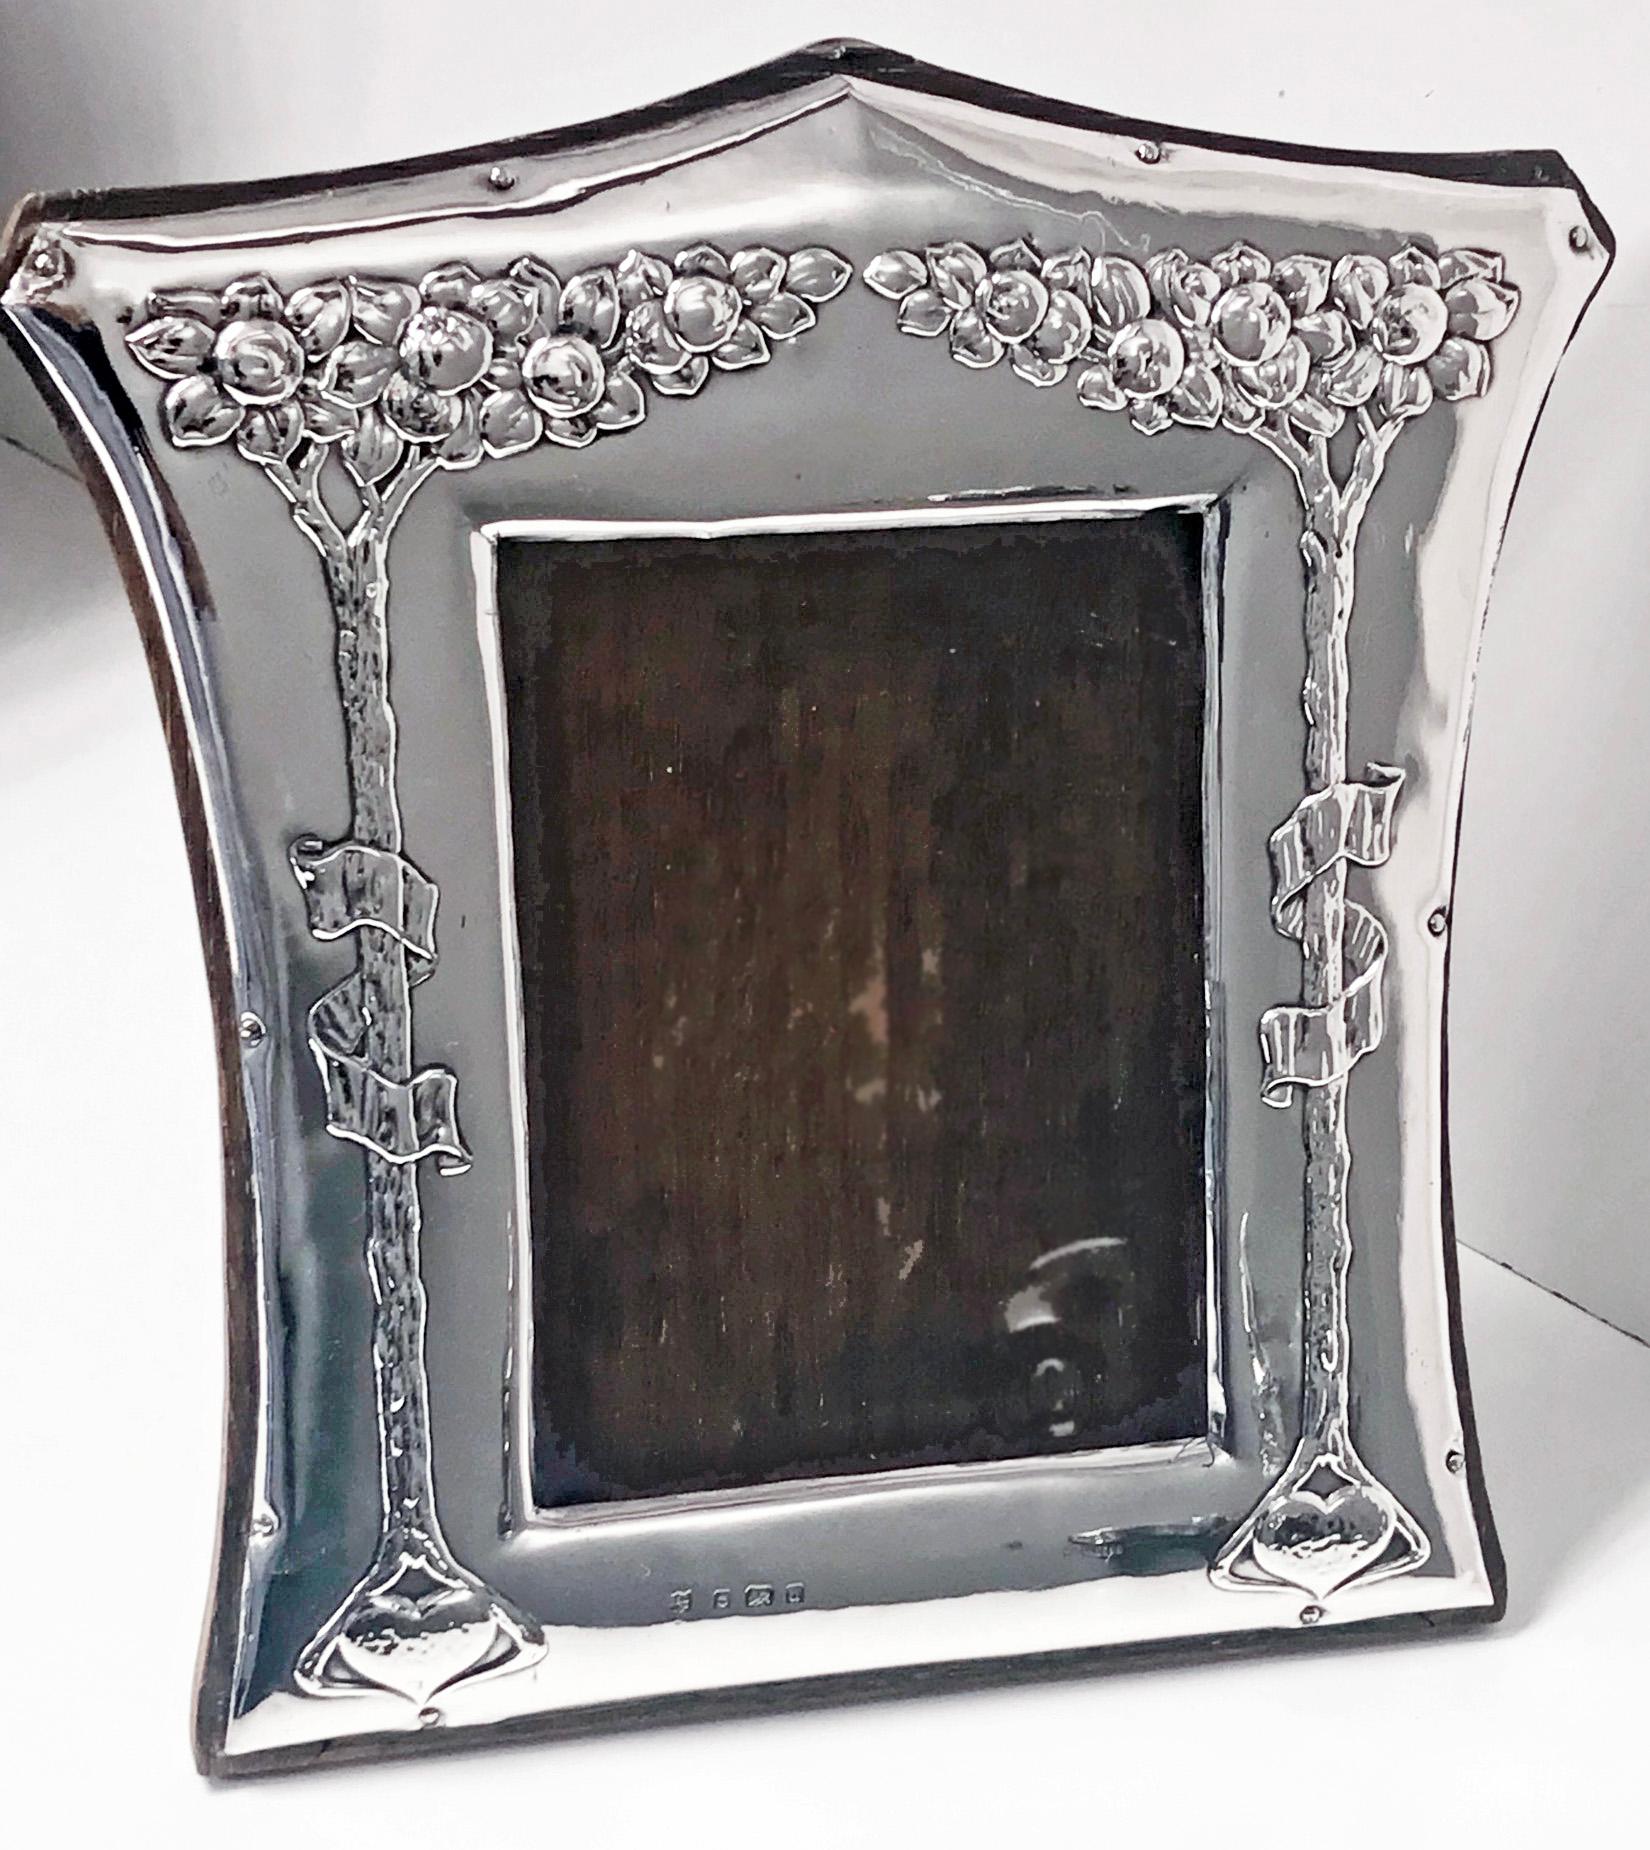 Art Nouveau English silver photograph frame, Birmingham, 1903, Charles Green. The frame decorated with oak trees, ribbons and hearts, mounted on oak with easel back. Frame measures: 8.50 x 8.125. Image size: 5 x 4 inches. Fully hallmarked.